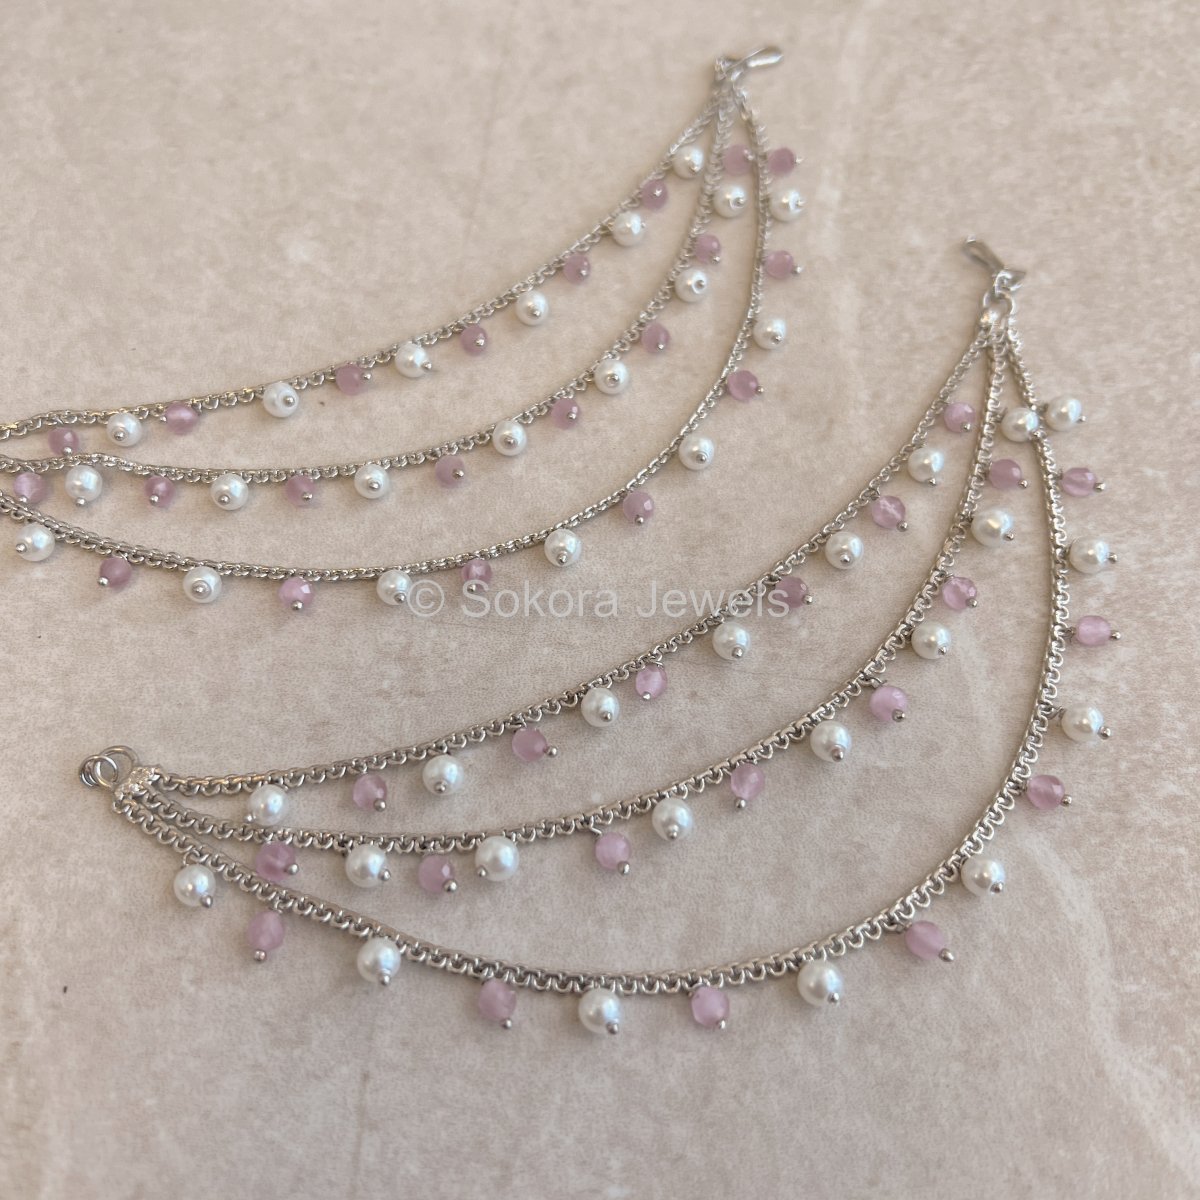 Silver and Light Pink Earring chains - SOKORA JEWELSSilver and Light Pink Earring chainsEARRINGS